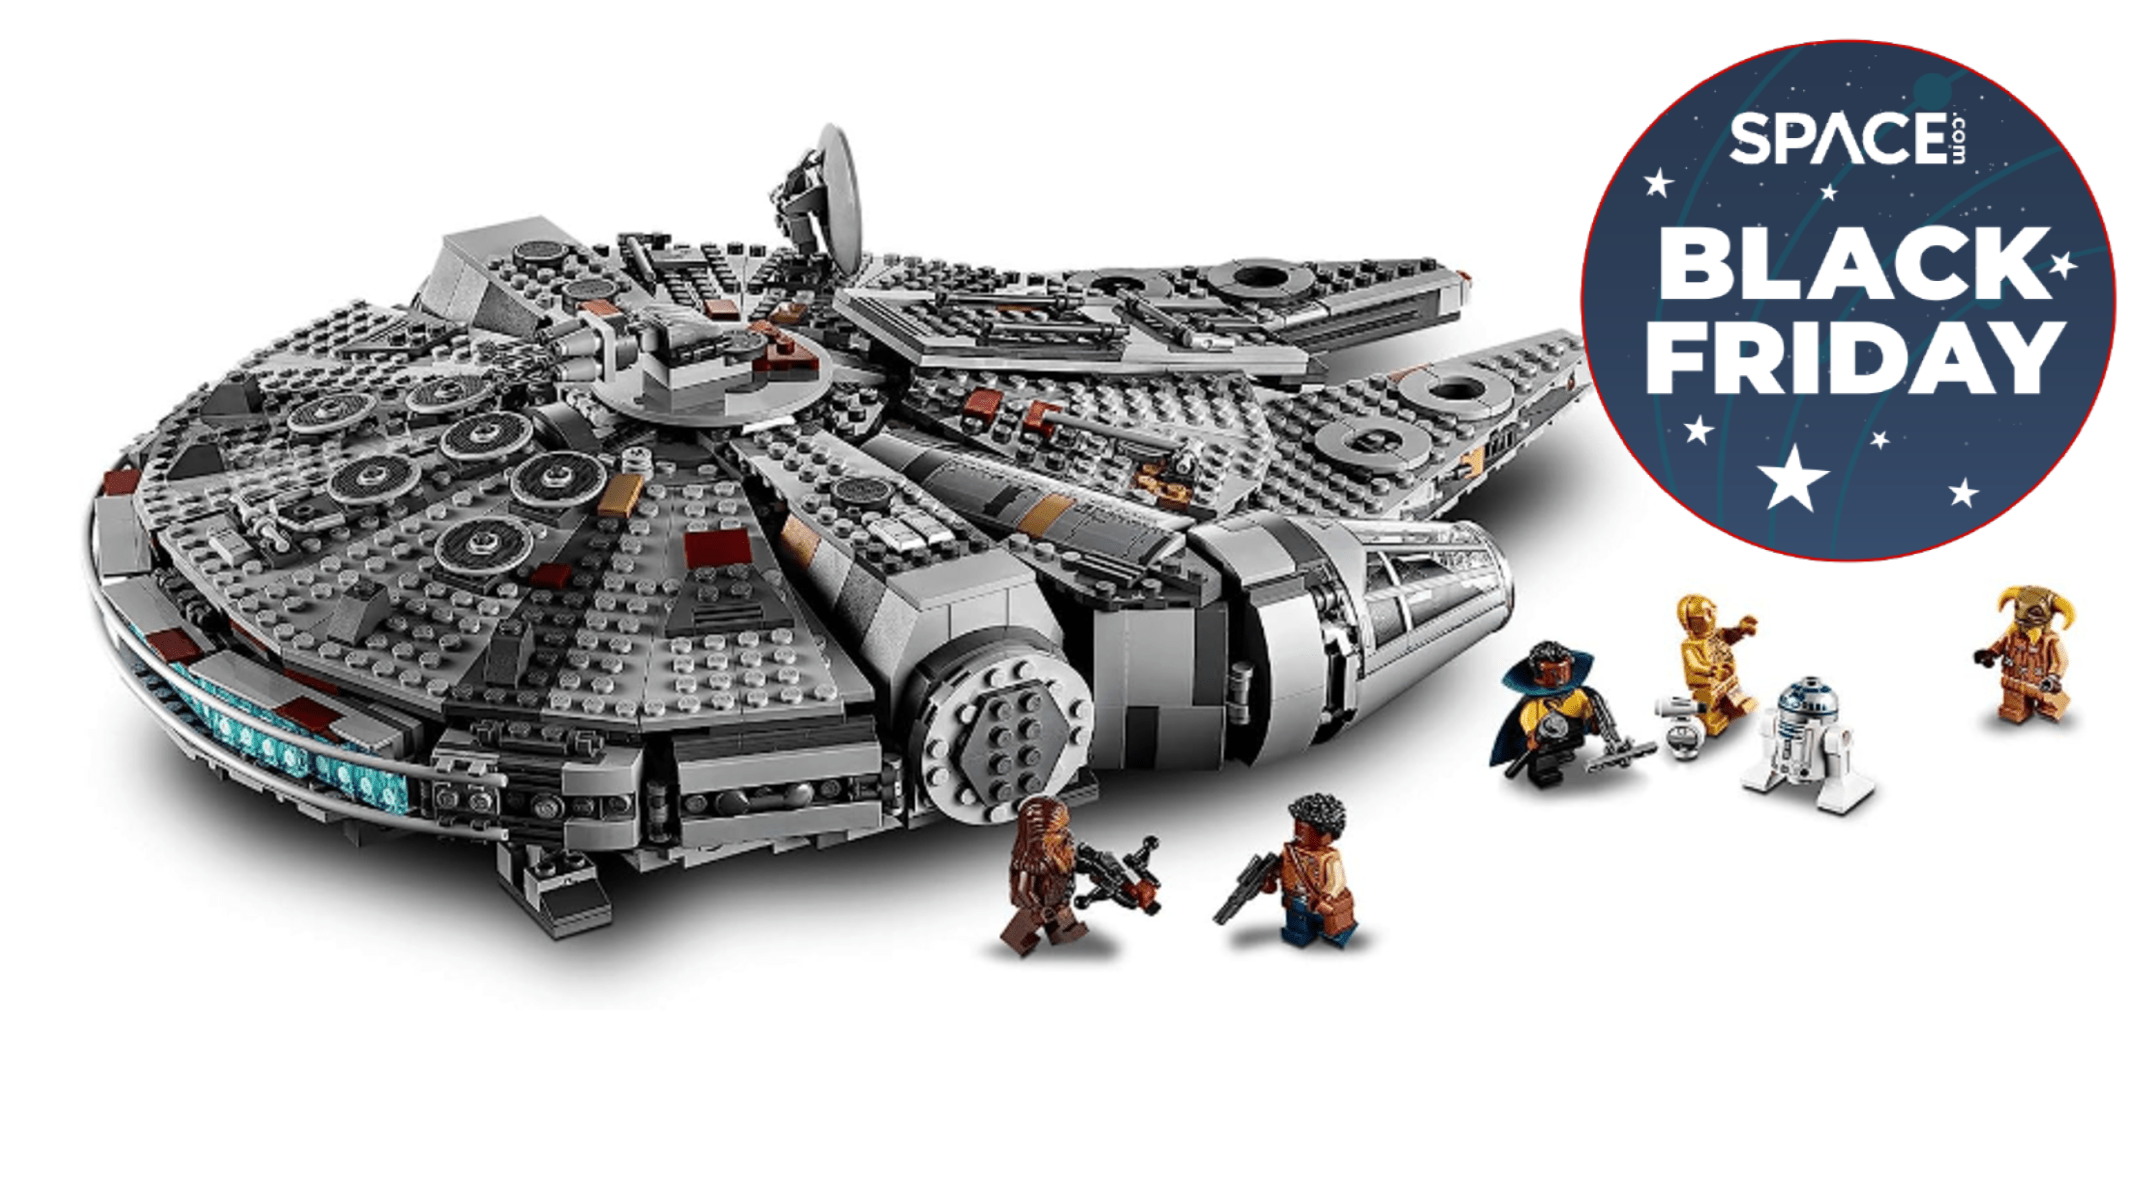 Save 20% on the Lego Star Wars Millennium Falcon set this Cyber Monday